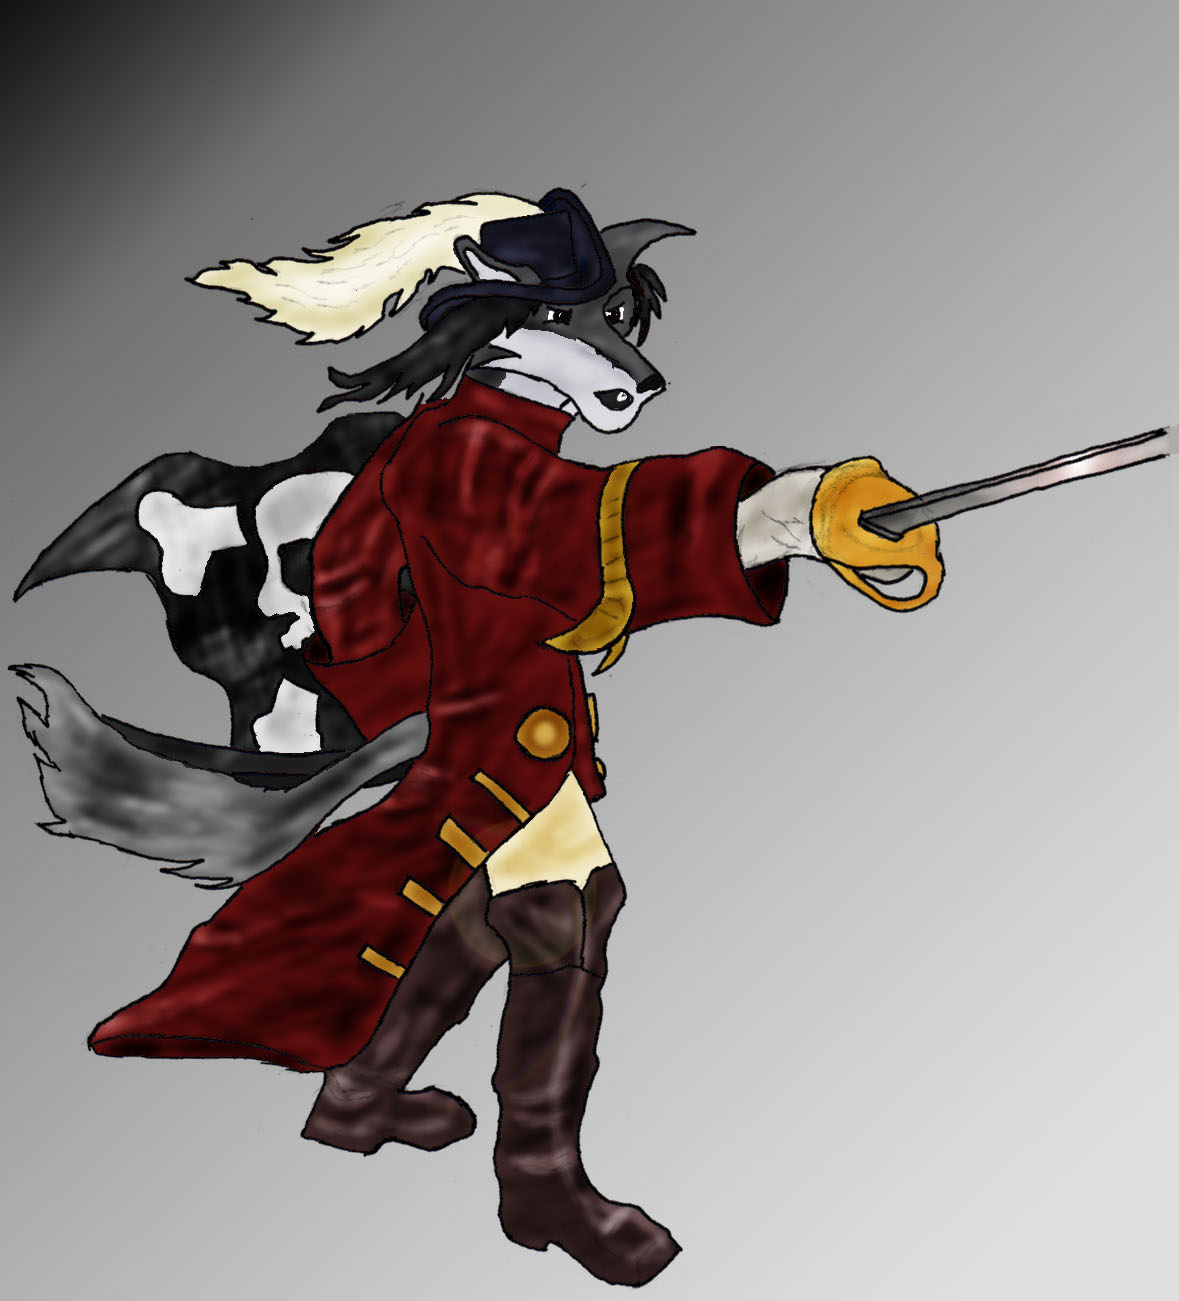 Furry Pirate by The_White_Dragon